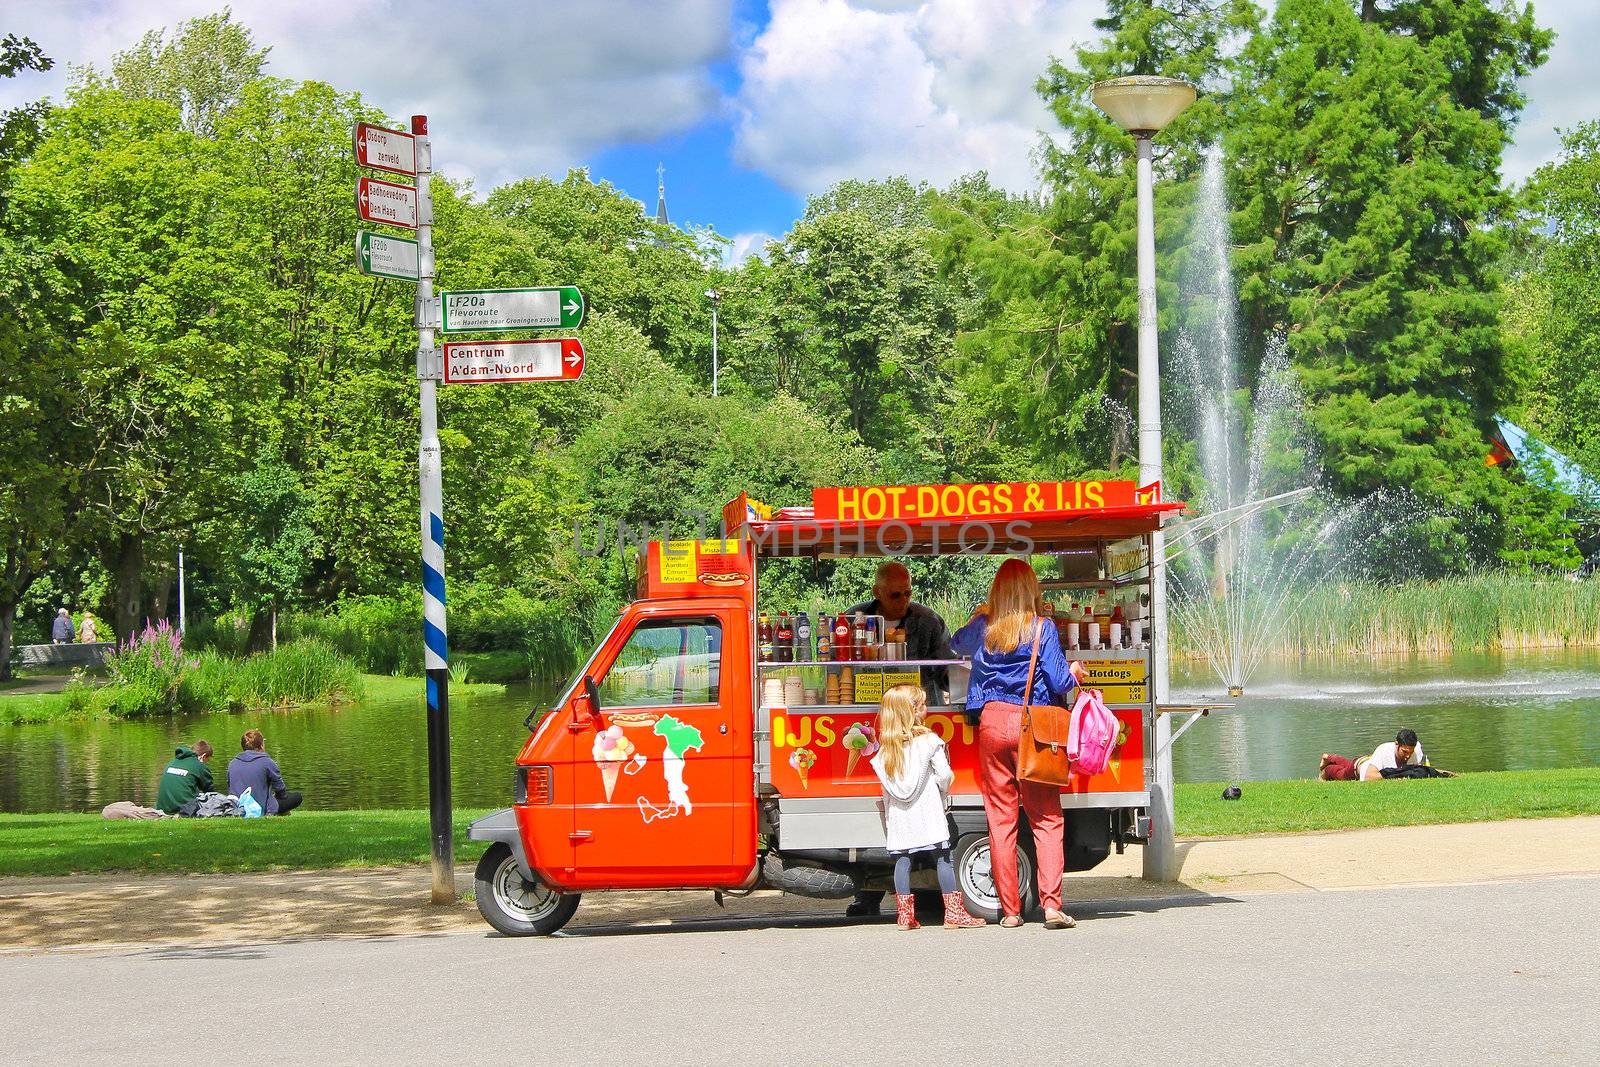 Snack cart in city park in Amsterdam. Netherlands by NickNick